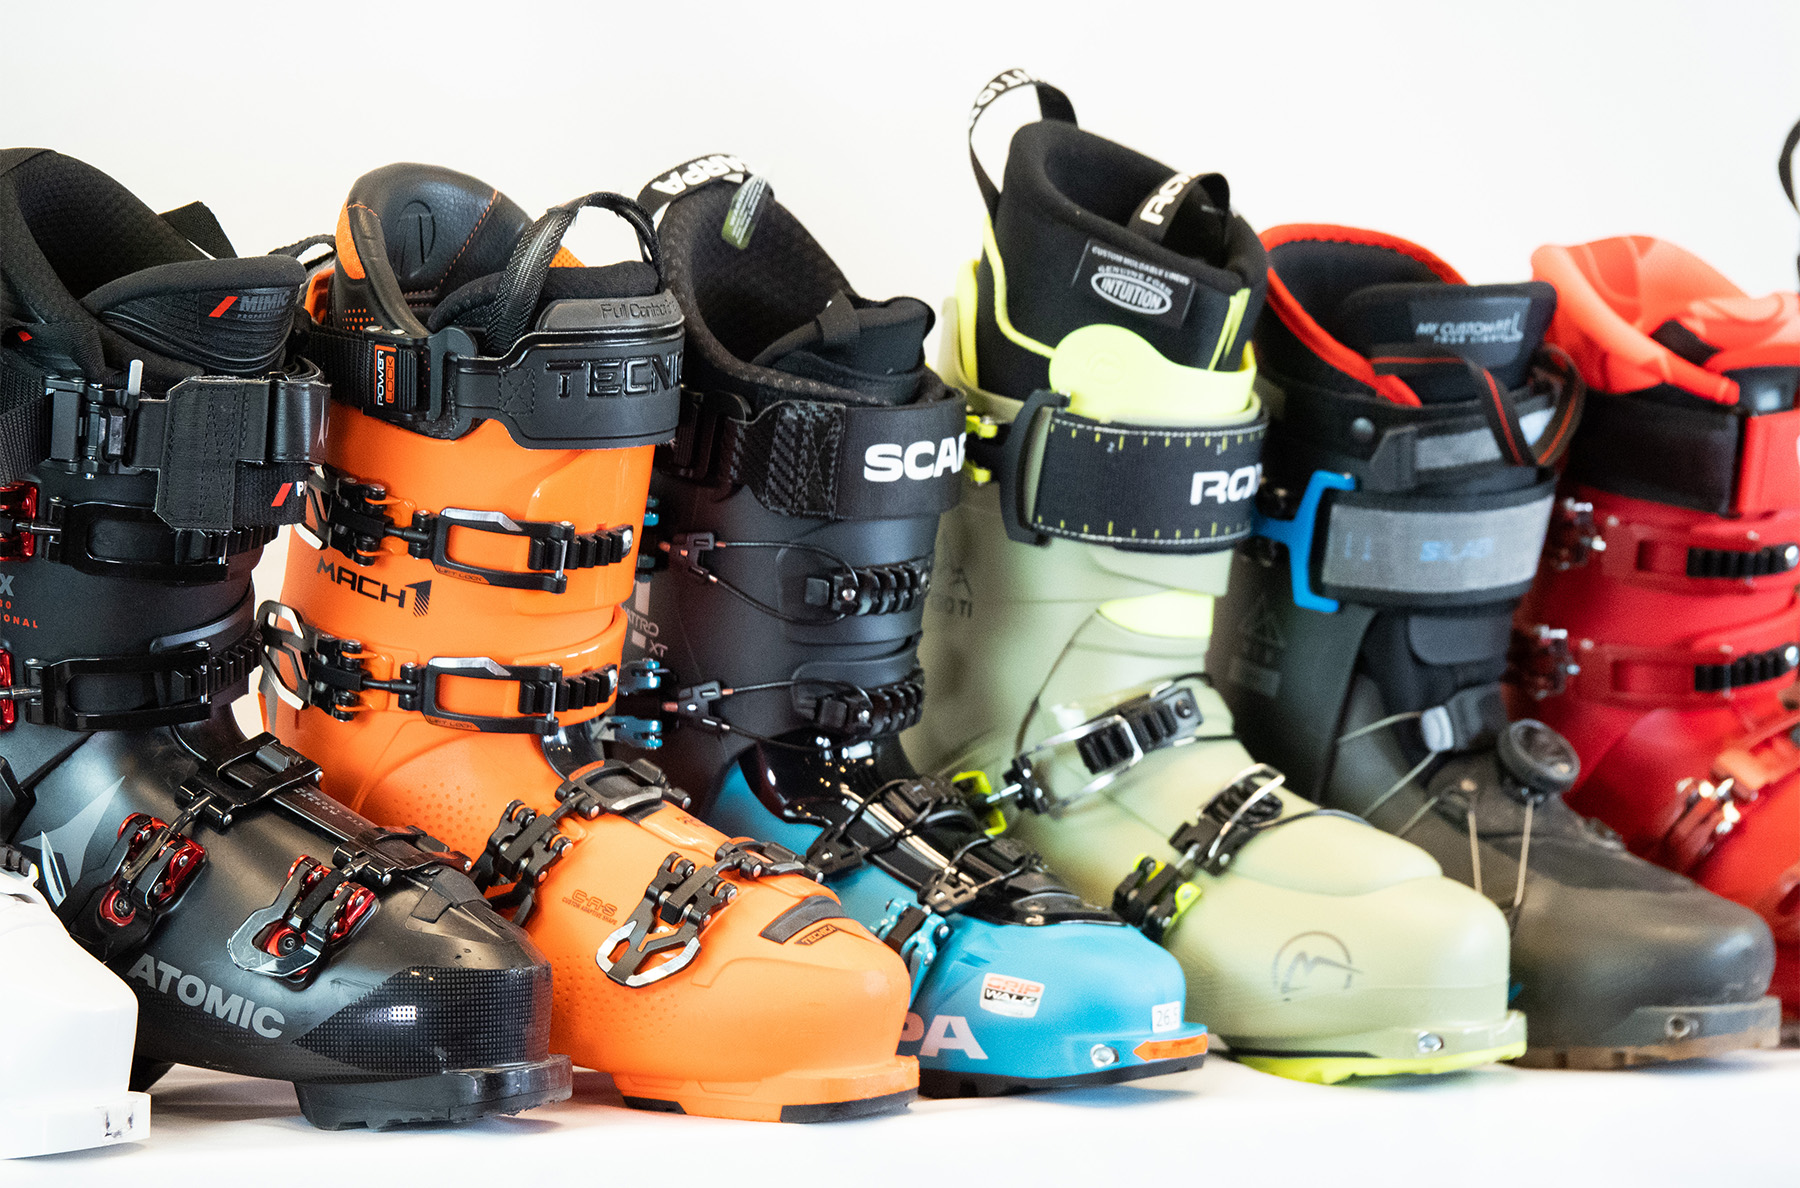 How to choose ski boots